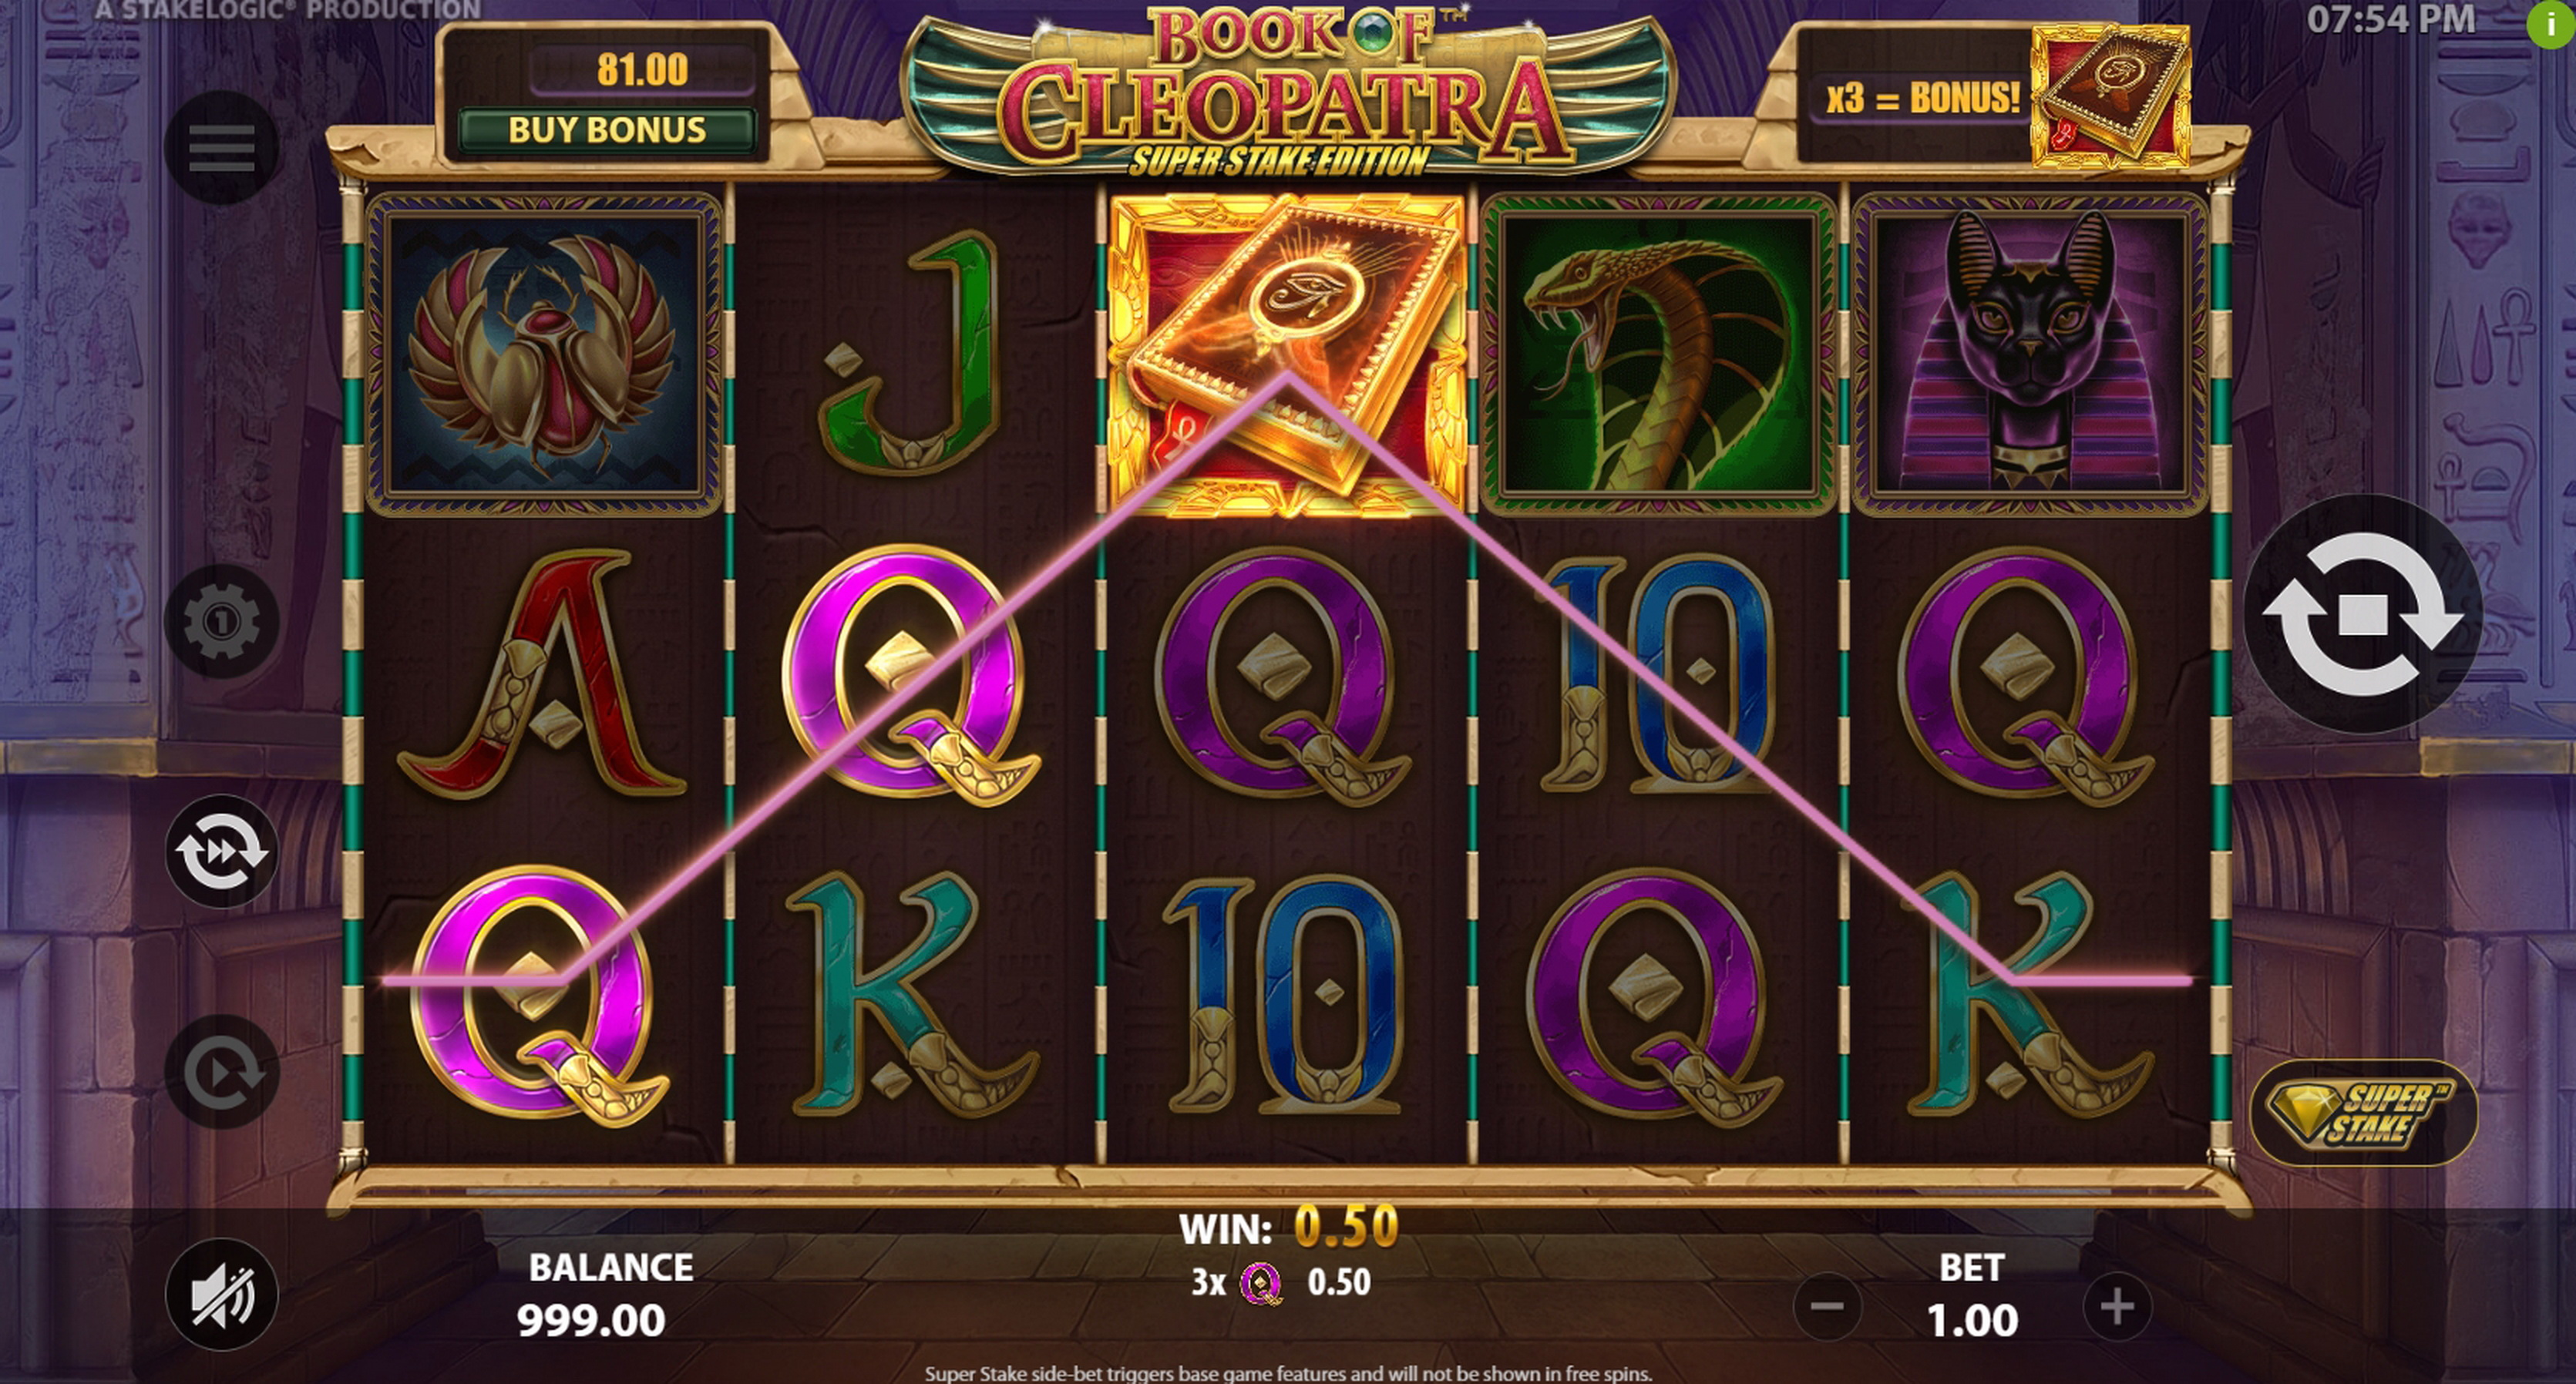 Win Money in Book of Cleopatra Super Stake Edition Free Slot Game by Stakelogic